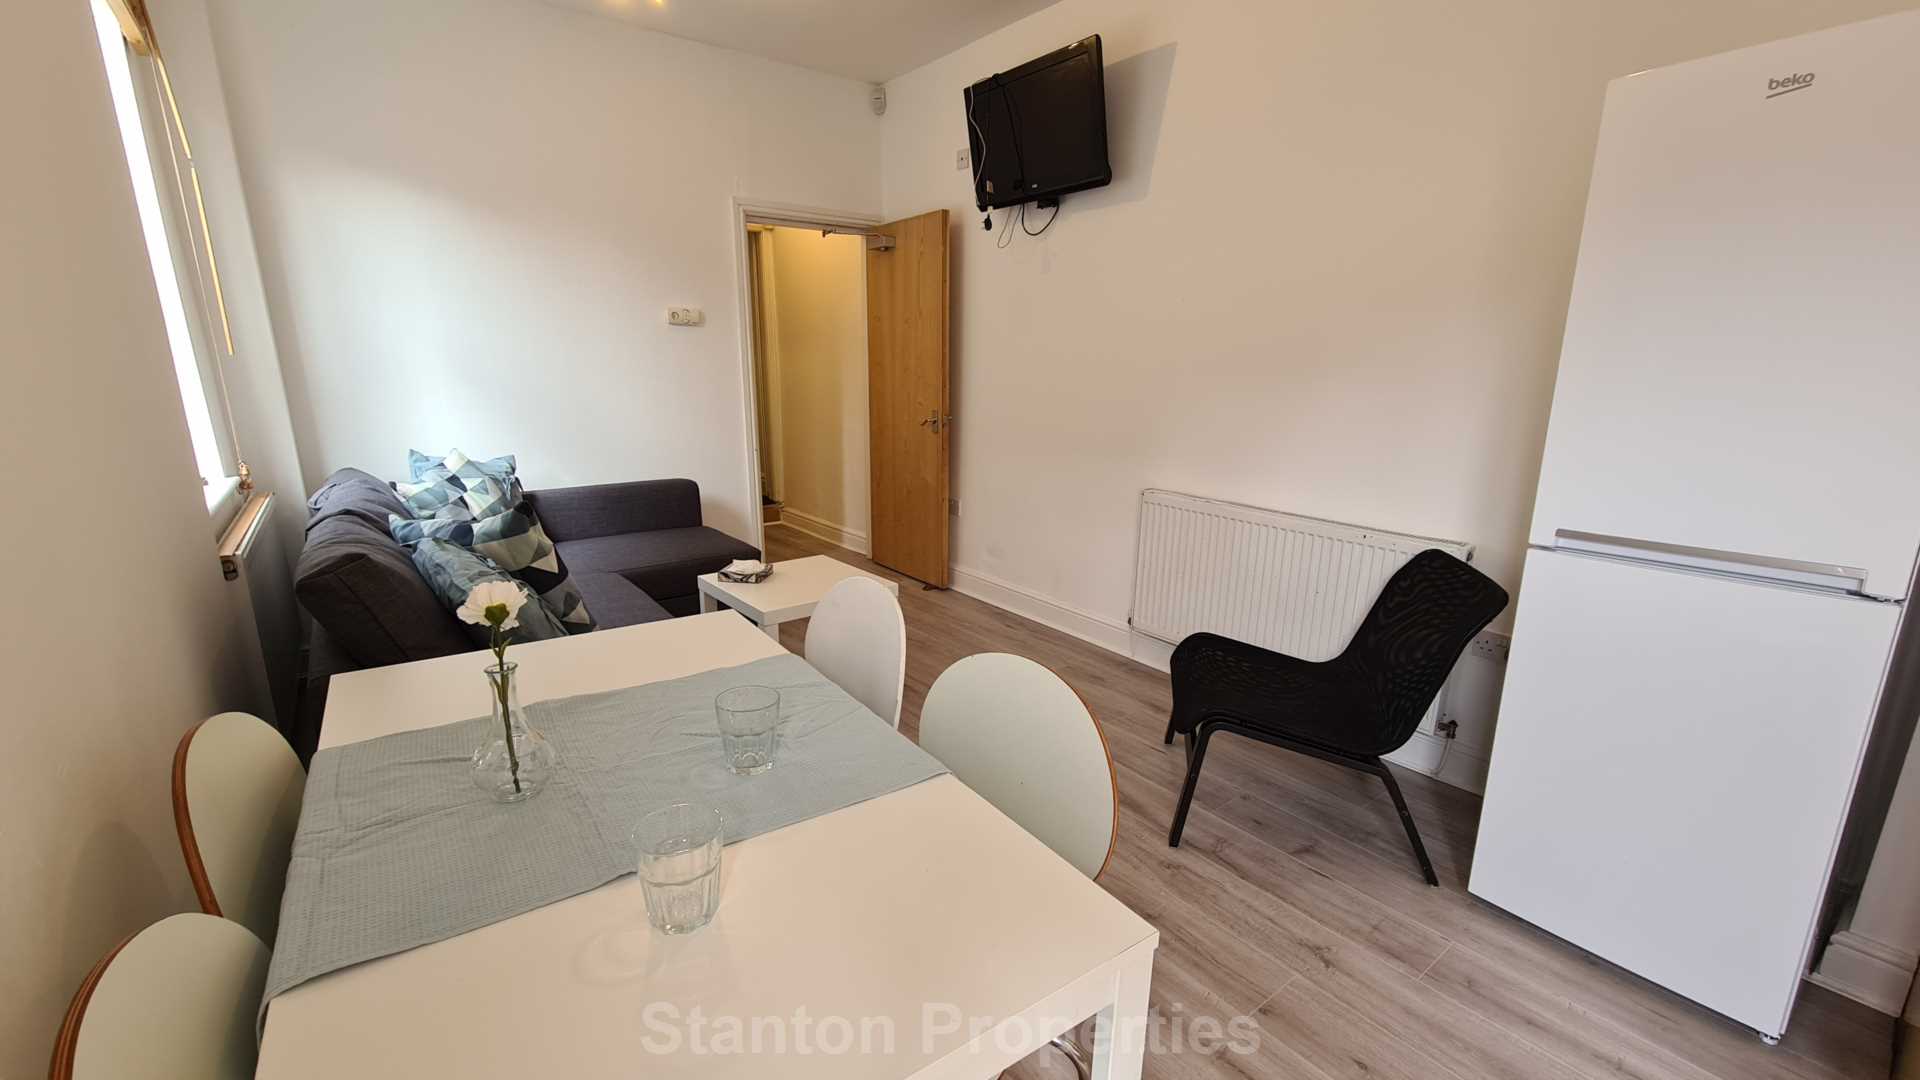 £120 pppw, See Video Tour, Mabfield Road, Manchester, Image 4